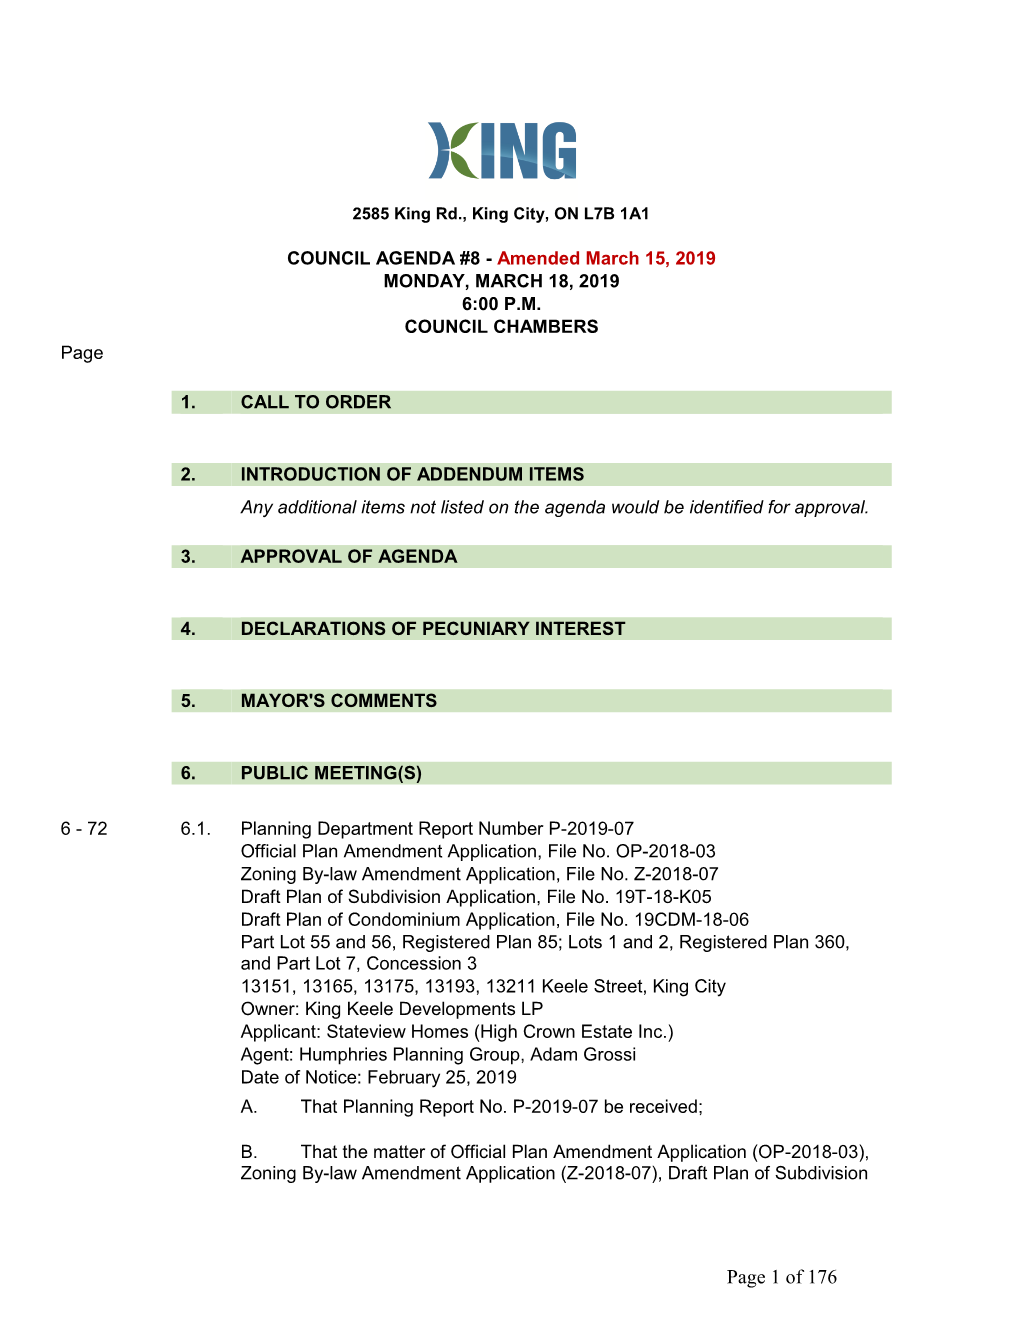 COUNCIL AGENDA #8 - Amended March 15, 2019 MONDAY, MARCH 18, 2019 6:00 P.M